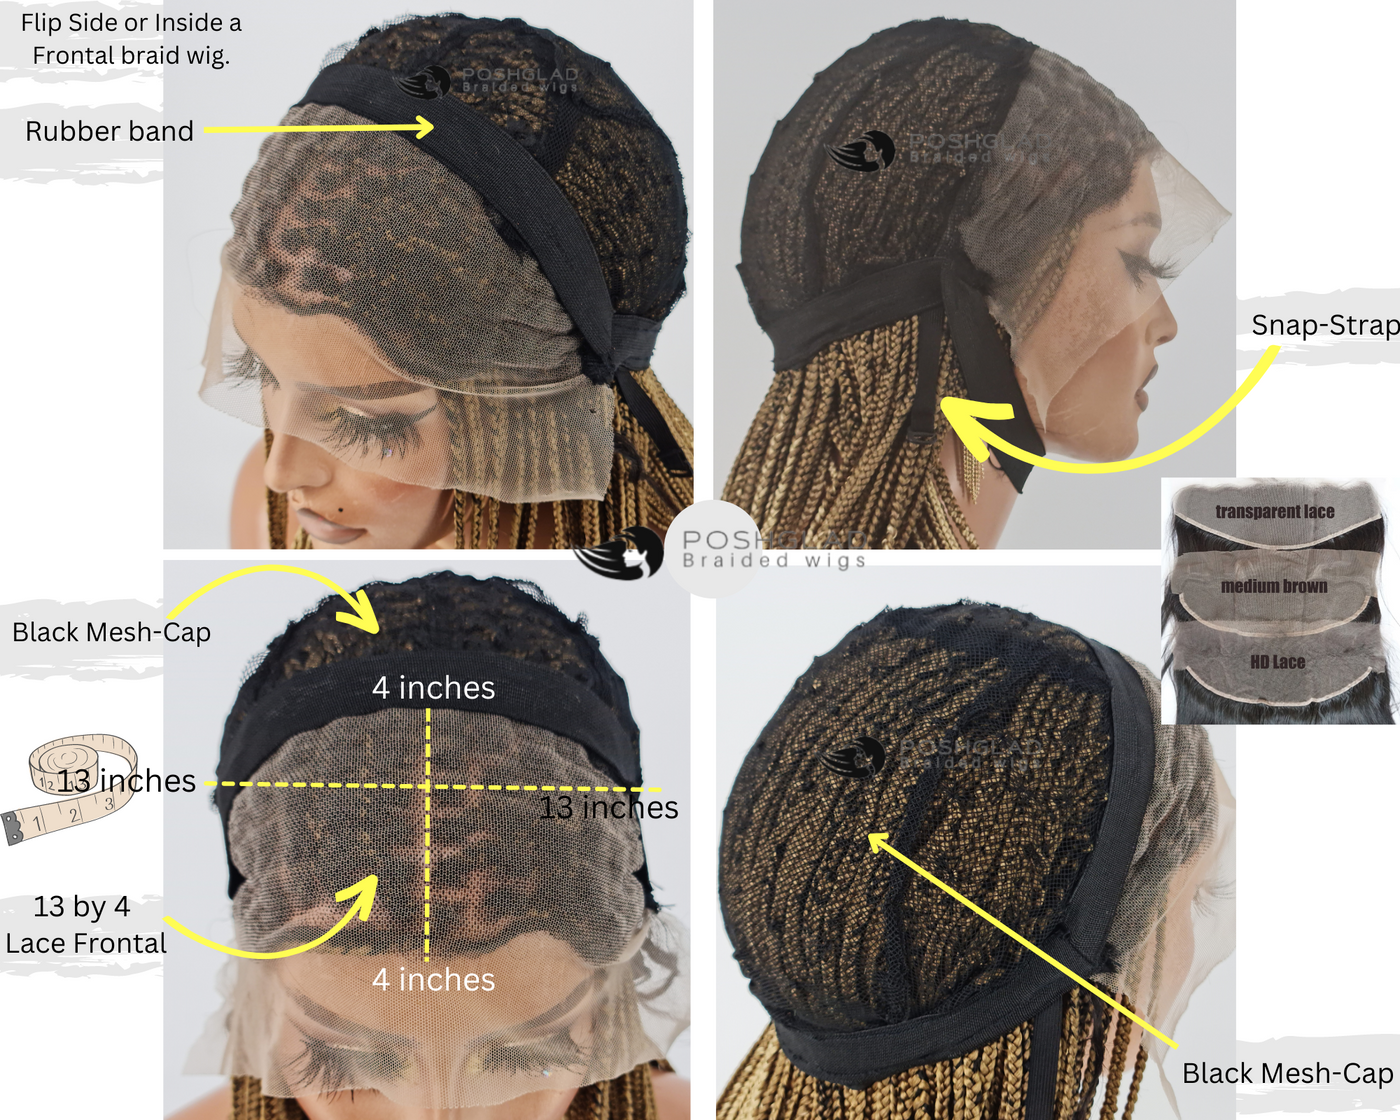 Knotless Braid Wig 13x4 Lace Frontal (Jalissa) Poshglad Braided Wigs Knotless Braid Wig